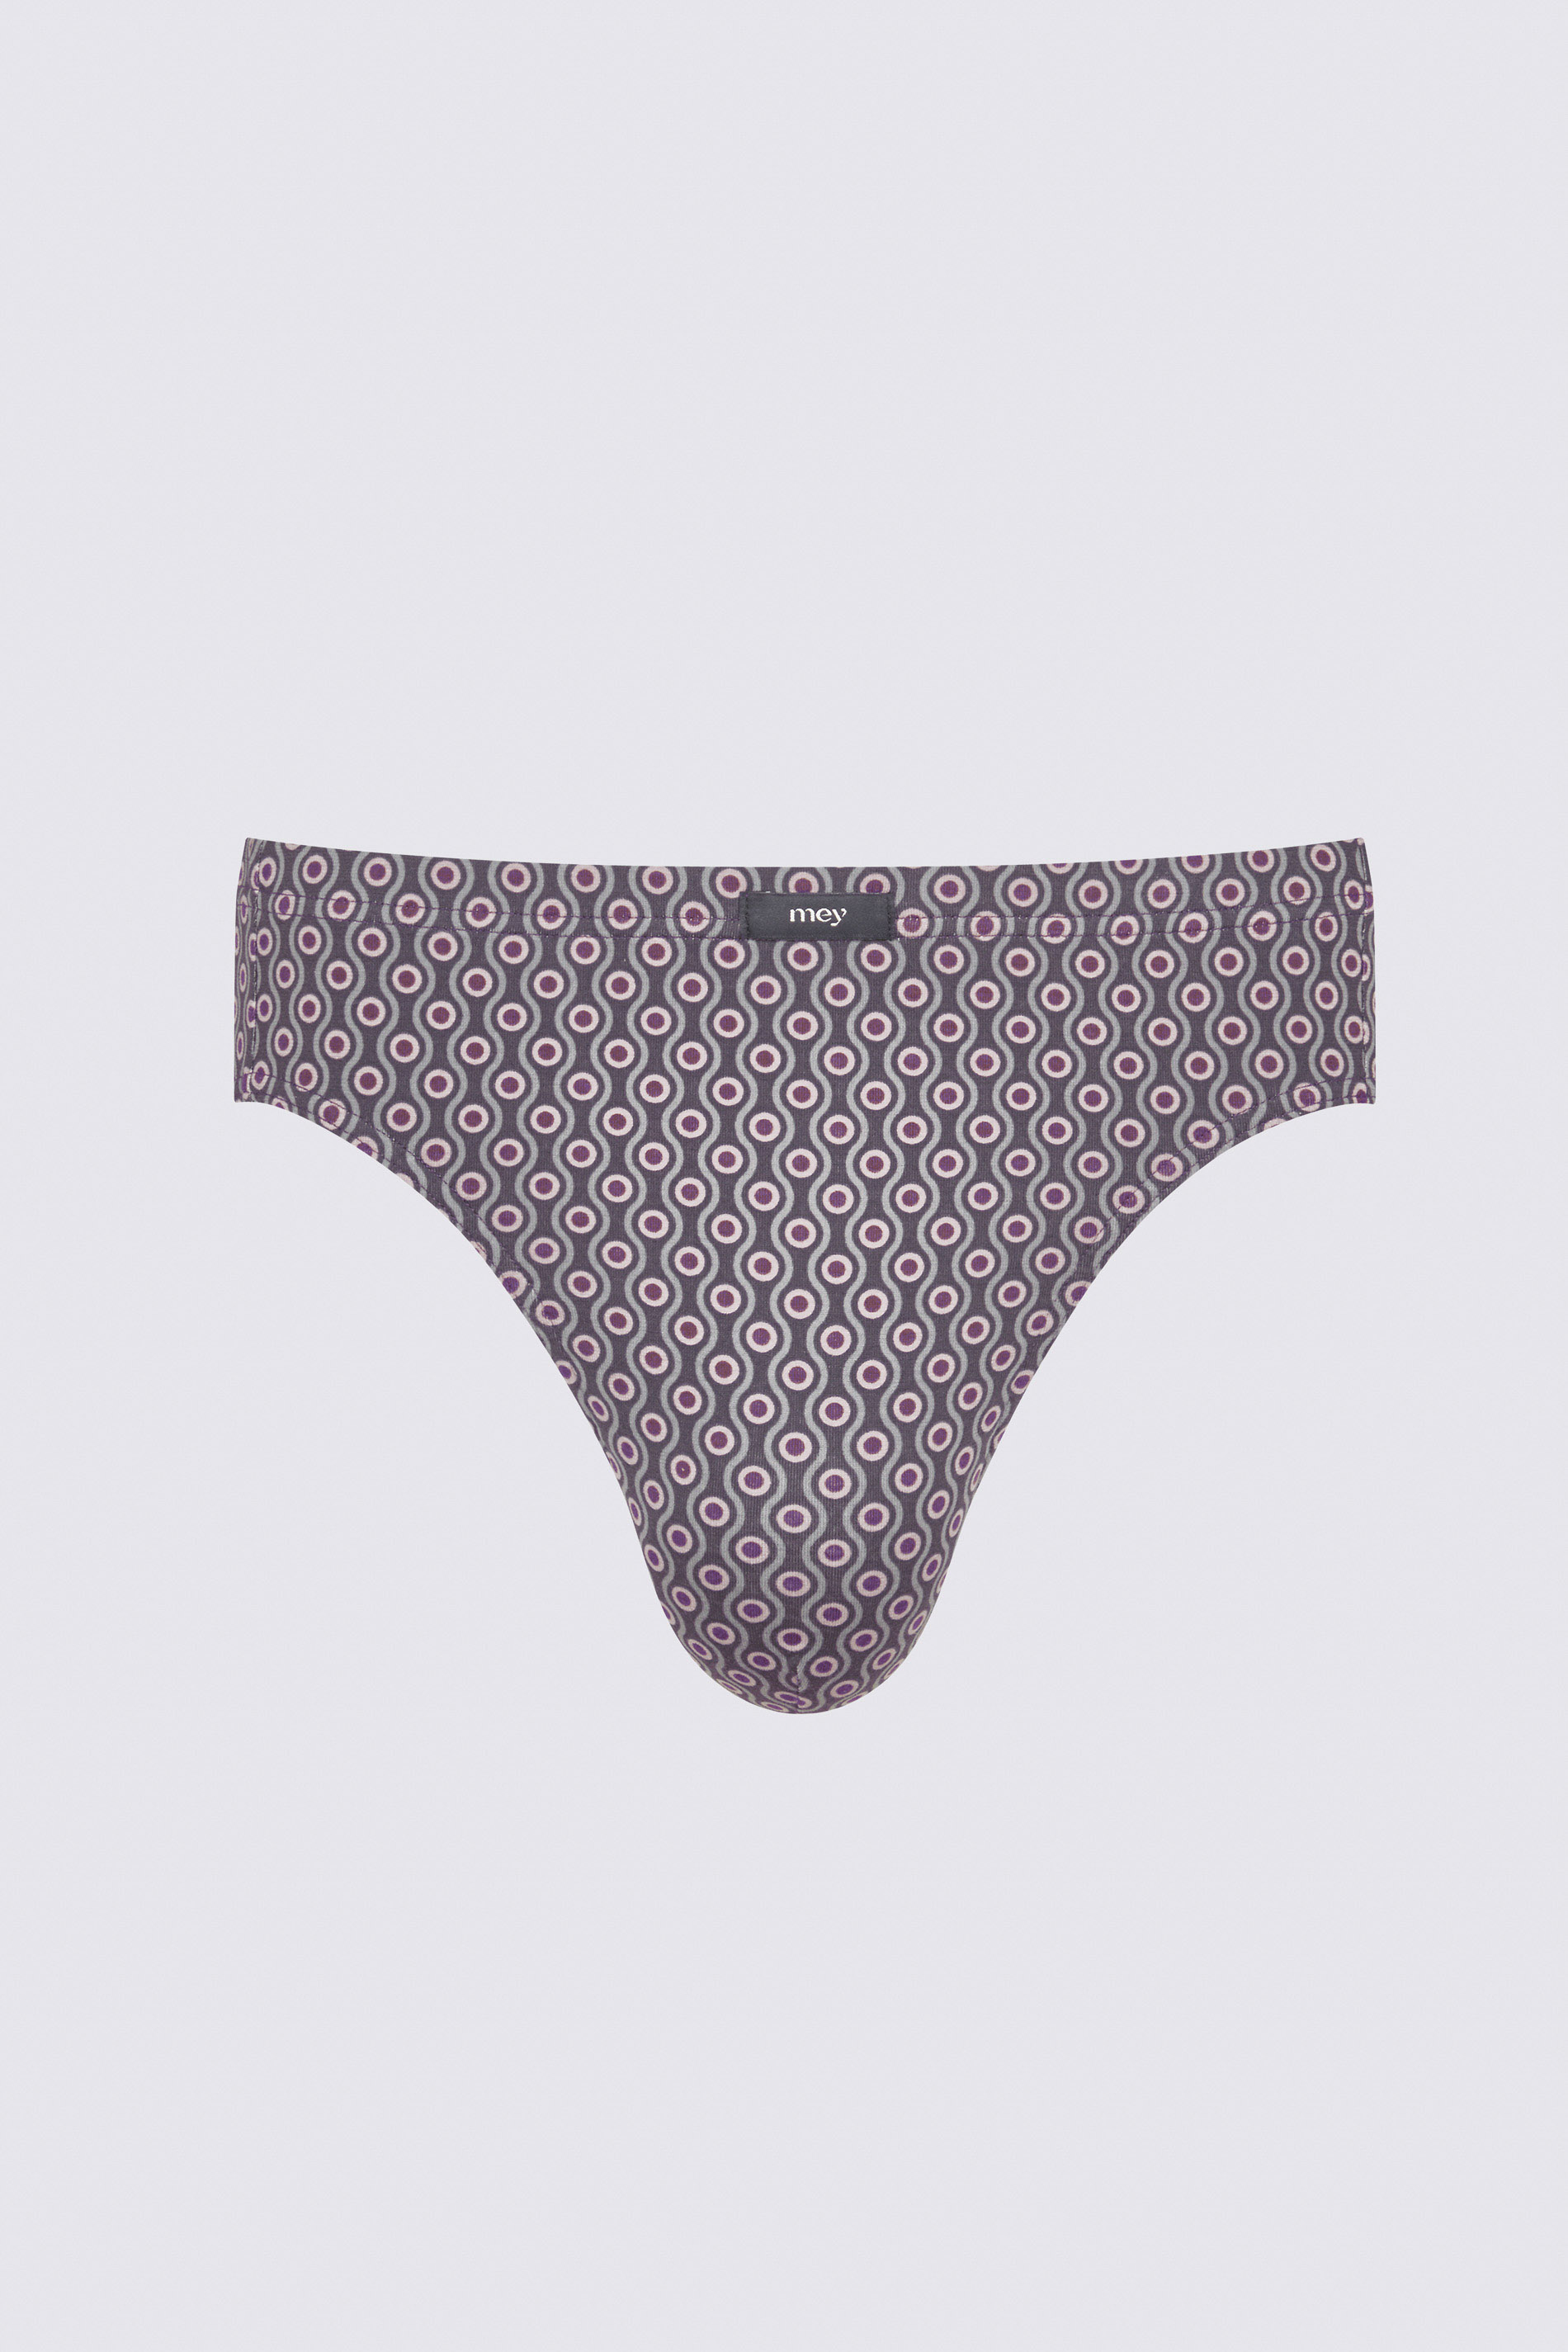 Jazz-pants Oxblood Serie 4 Col Dots Uitknippen | mey®